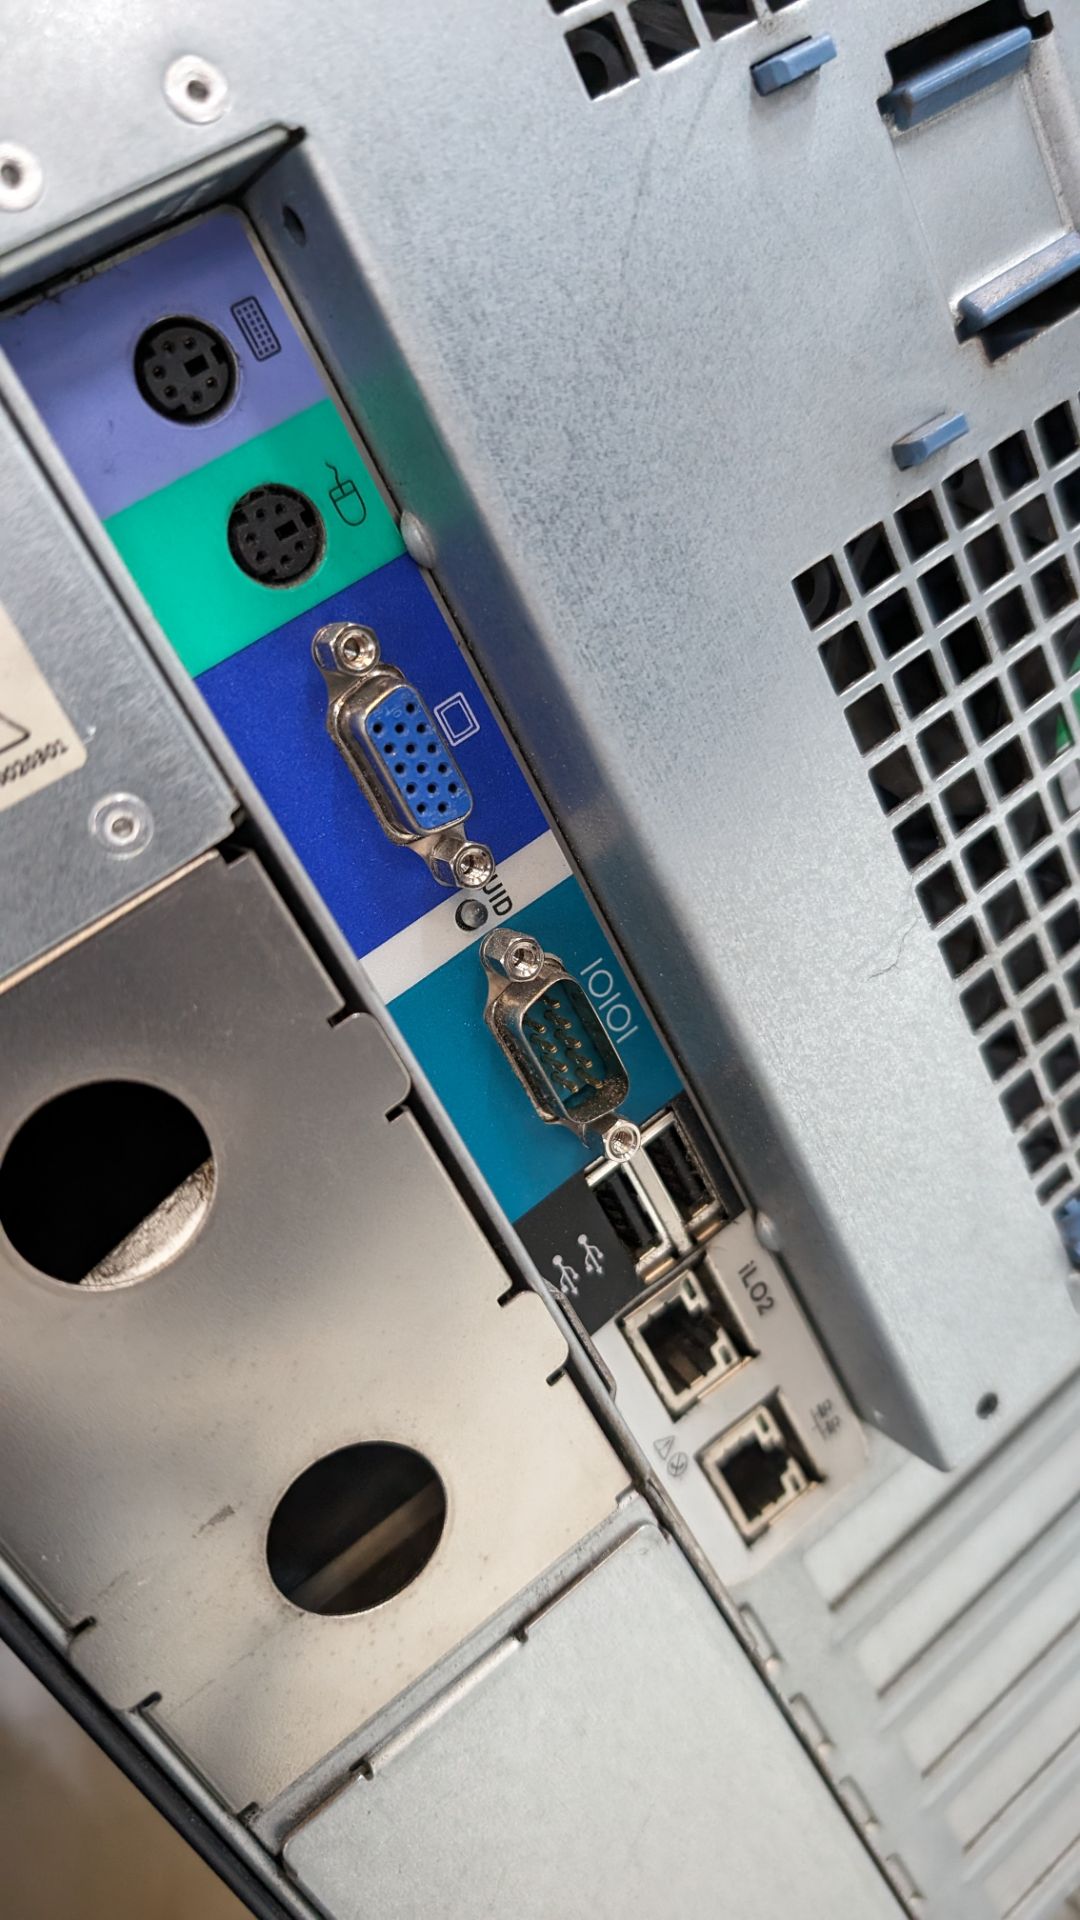 HP server incorporating 2 off hot swap drives, optical drive & HP Storageworks DAT 160 tape drive - Image 11 of 15